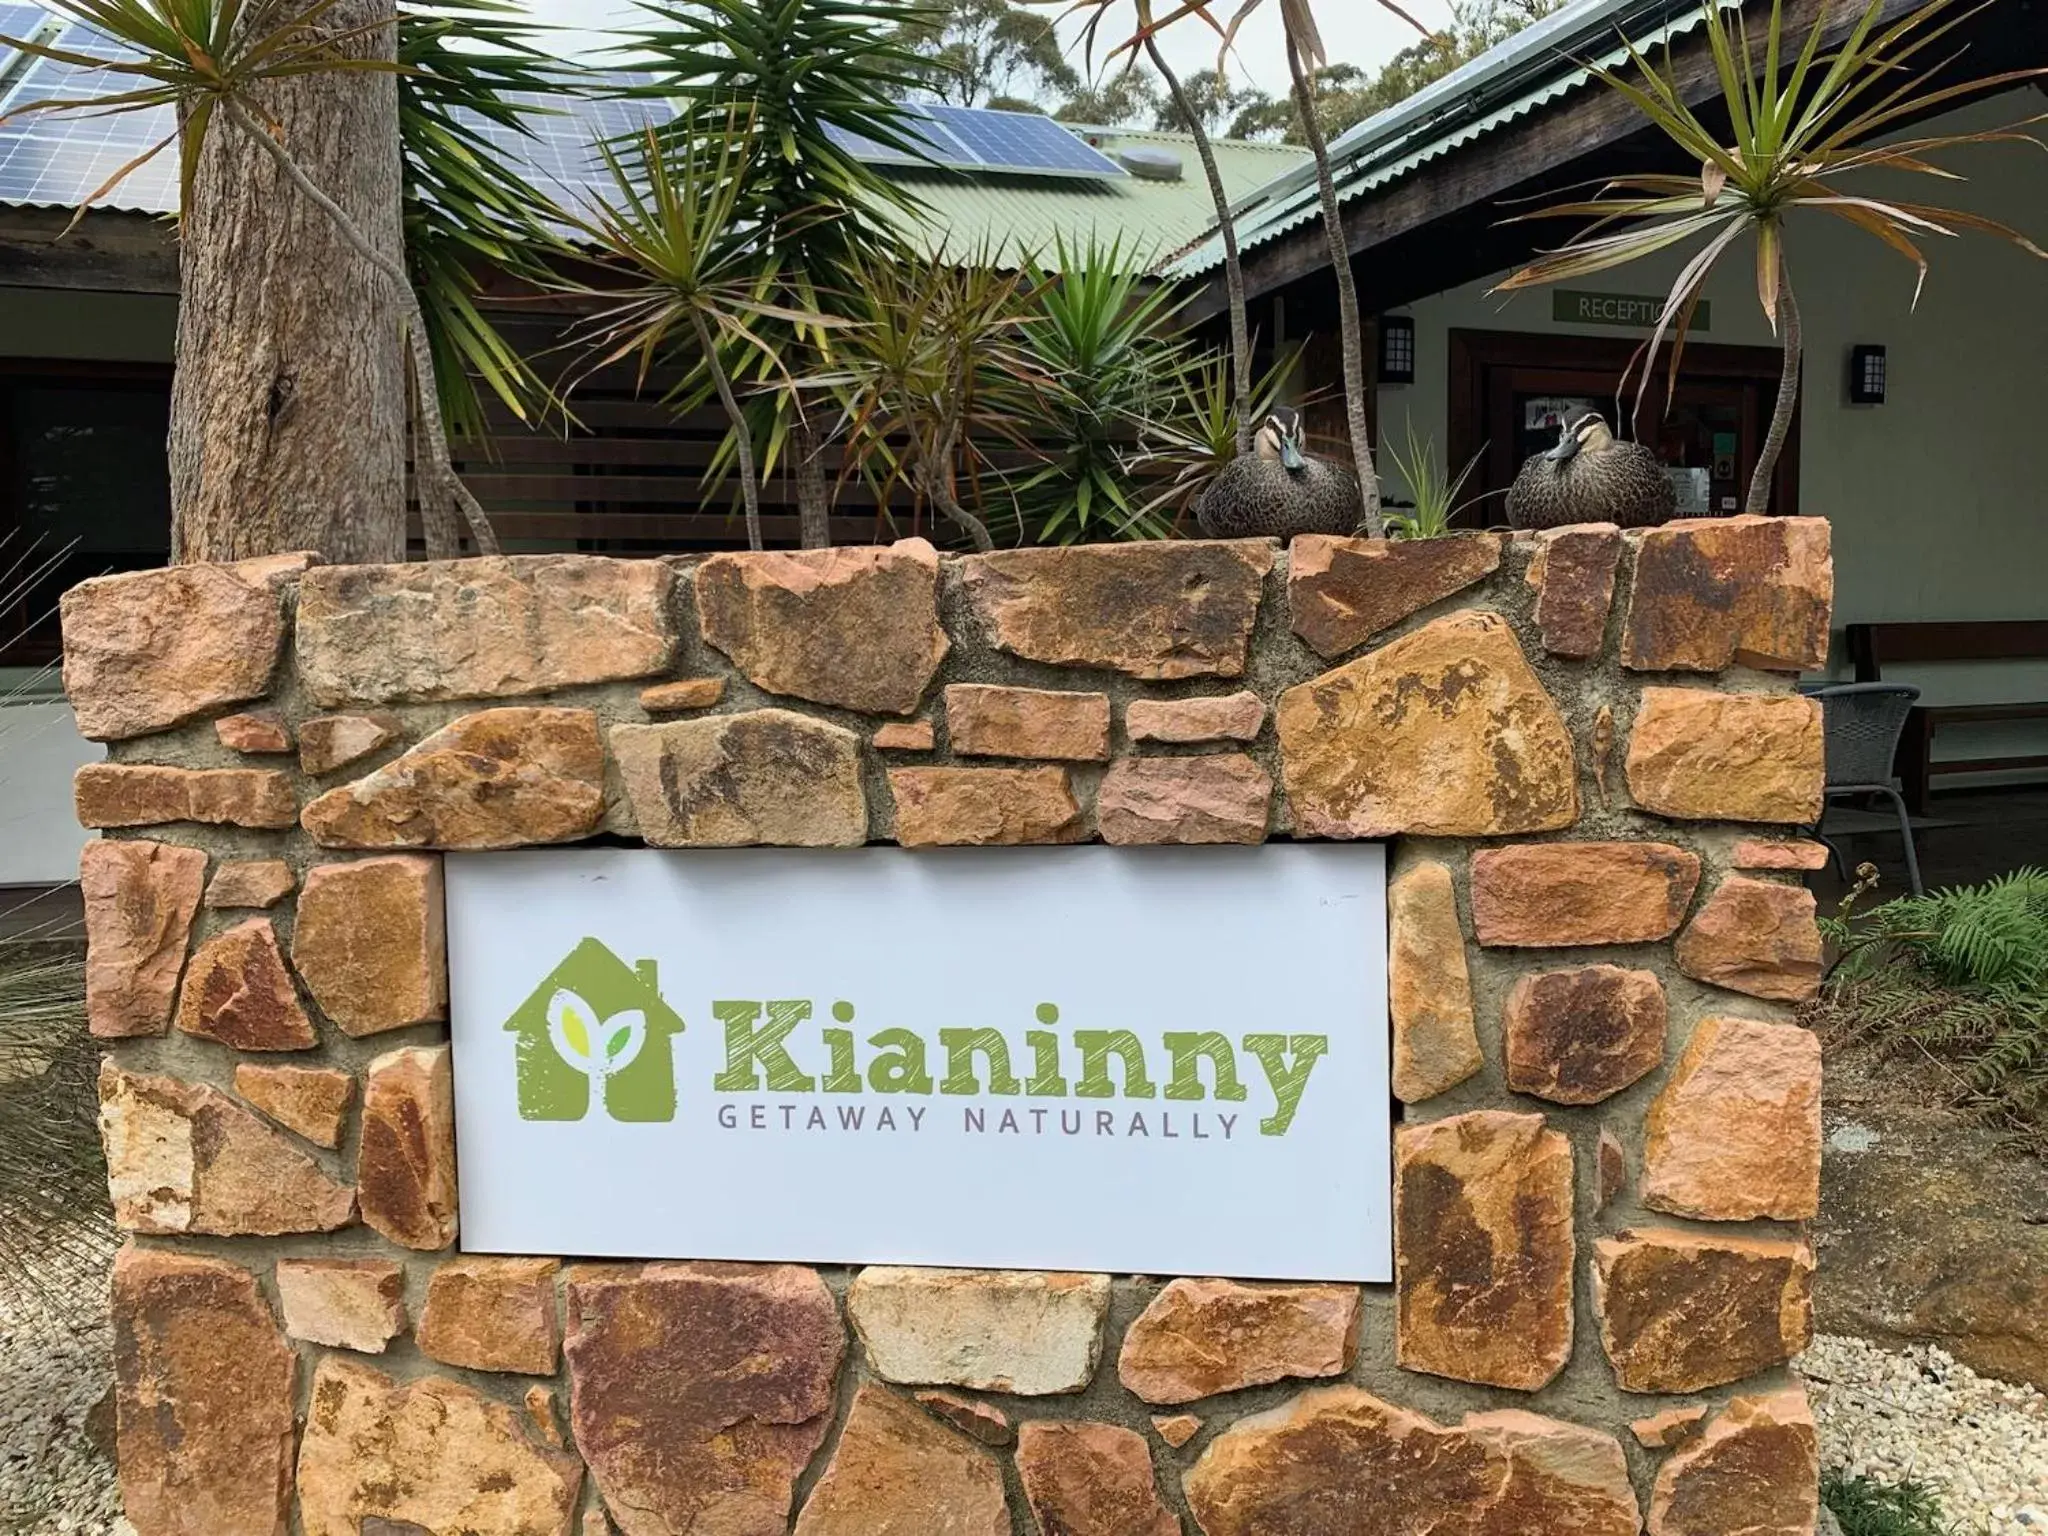 Property logo or sign in Kianinny Bush Cottages